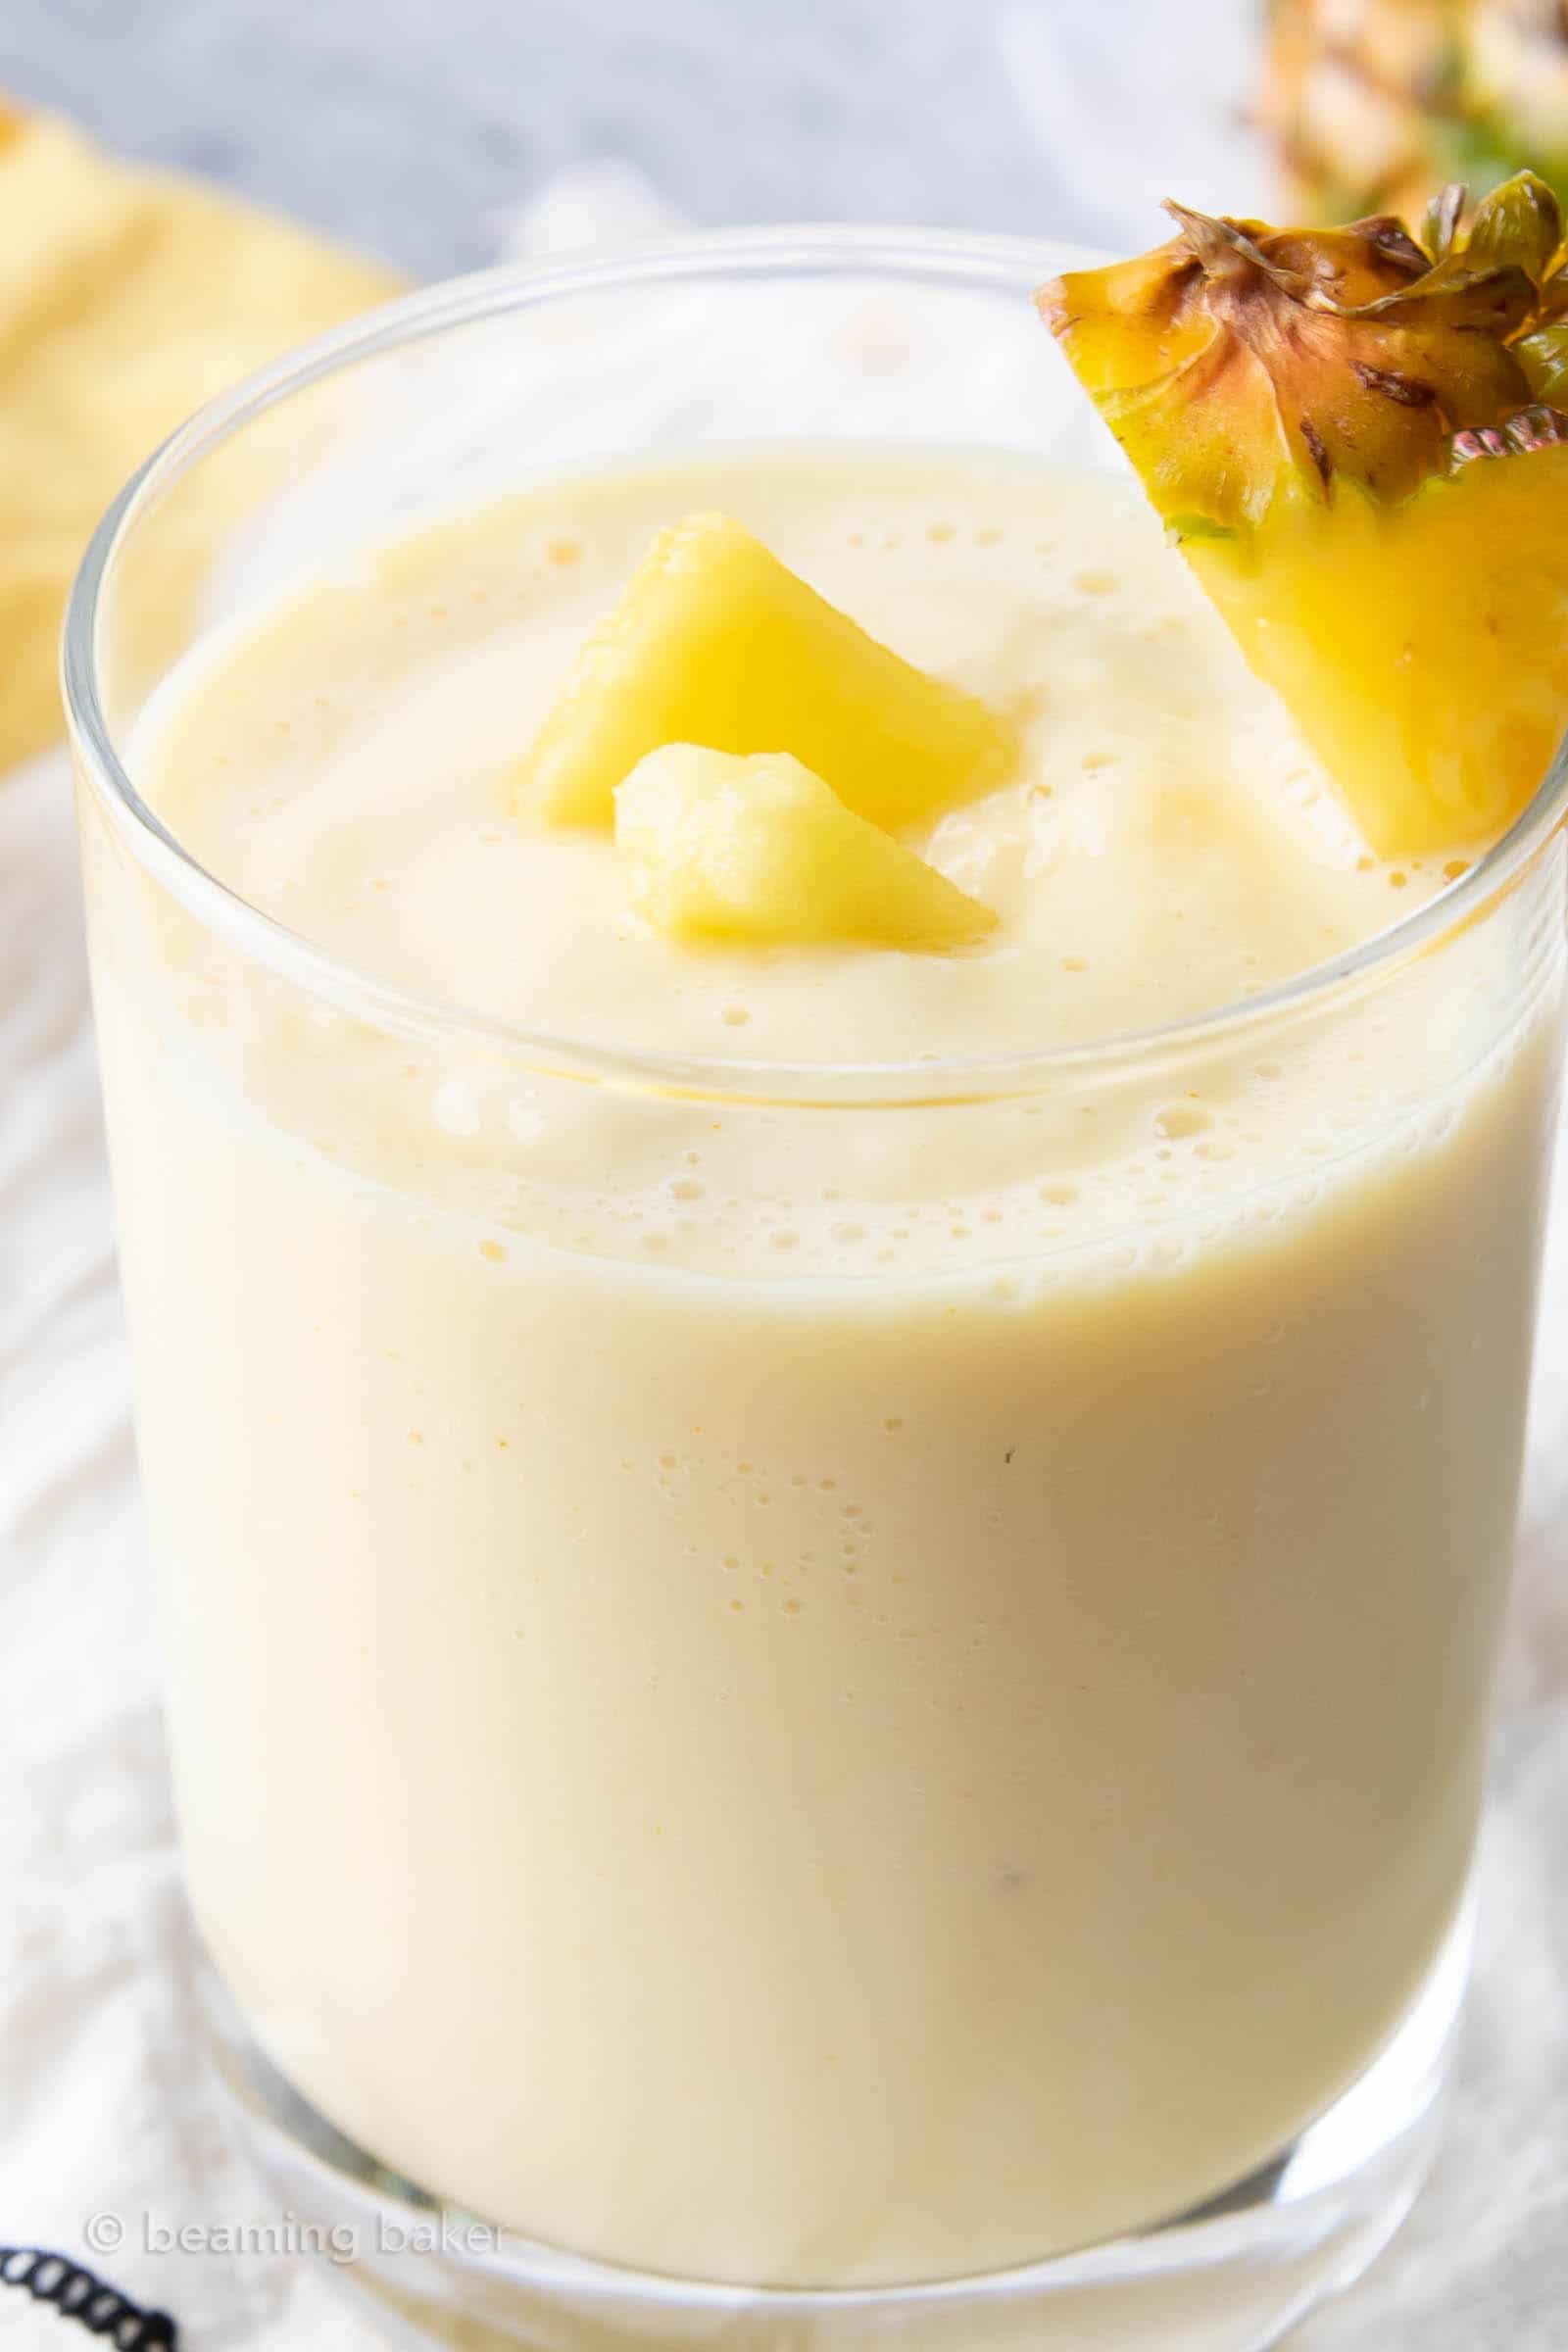 super closeup of how to make a pineapple smoothie with yogurt served in a glass with pineapple pieces as garnish